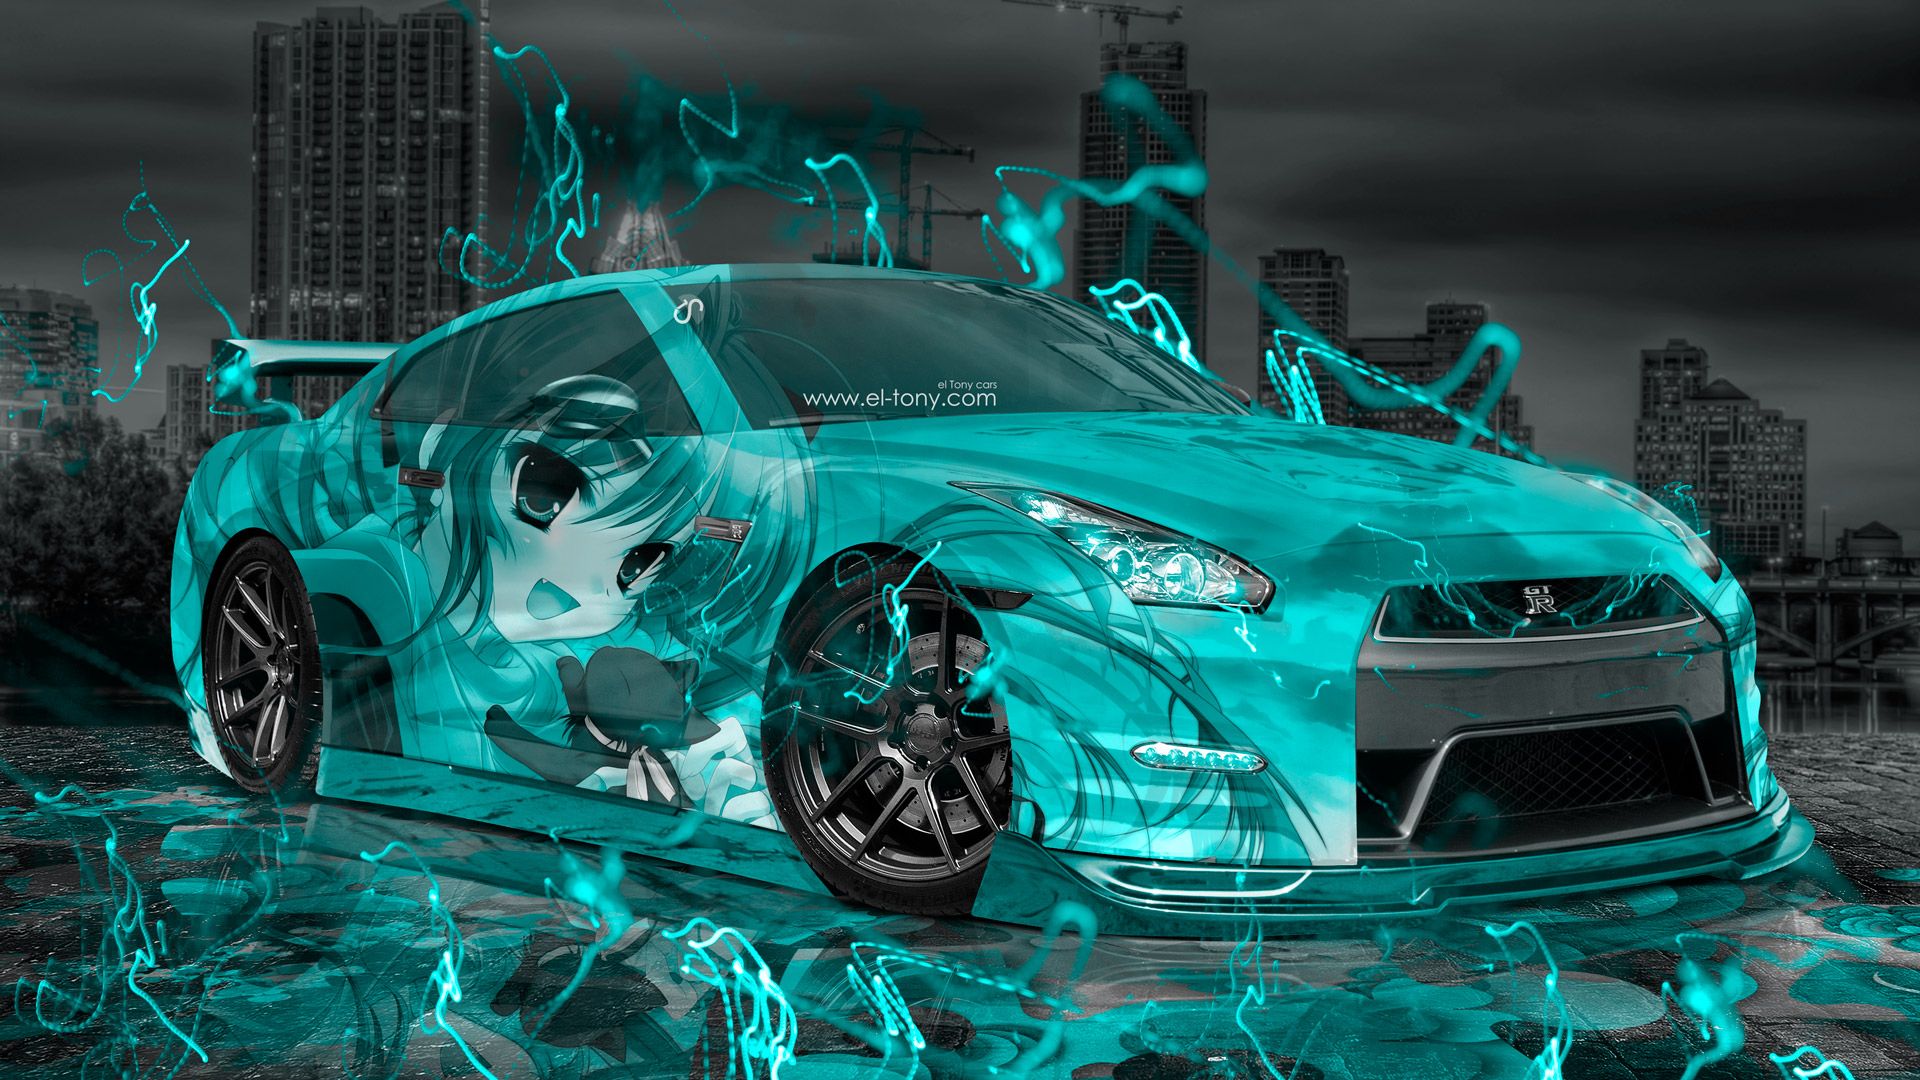 Anime Cars Wallpapers - Wallpaper Cave-demhanvico.com.vn